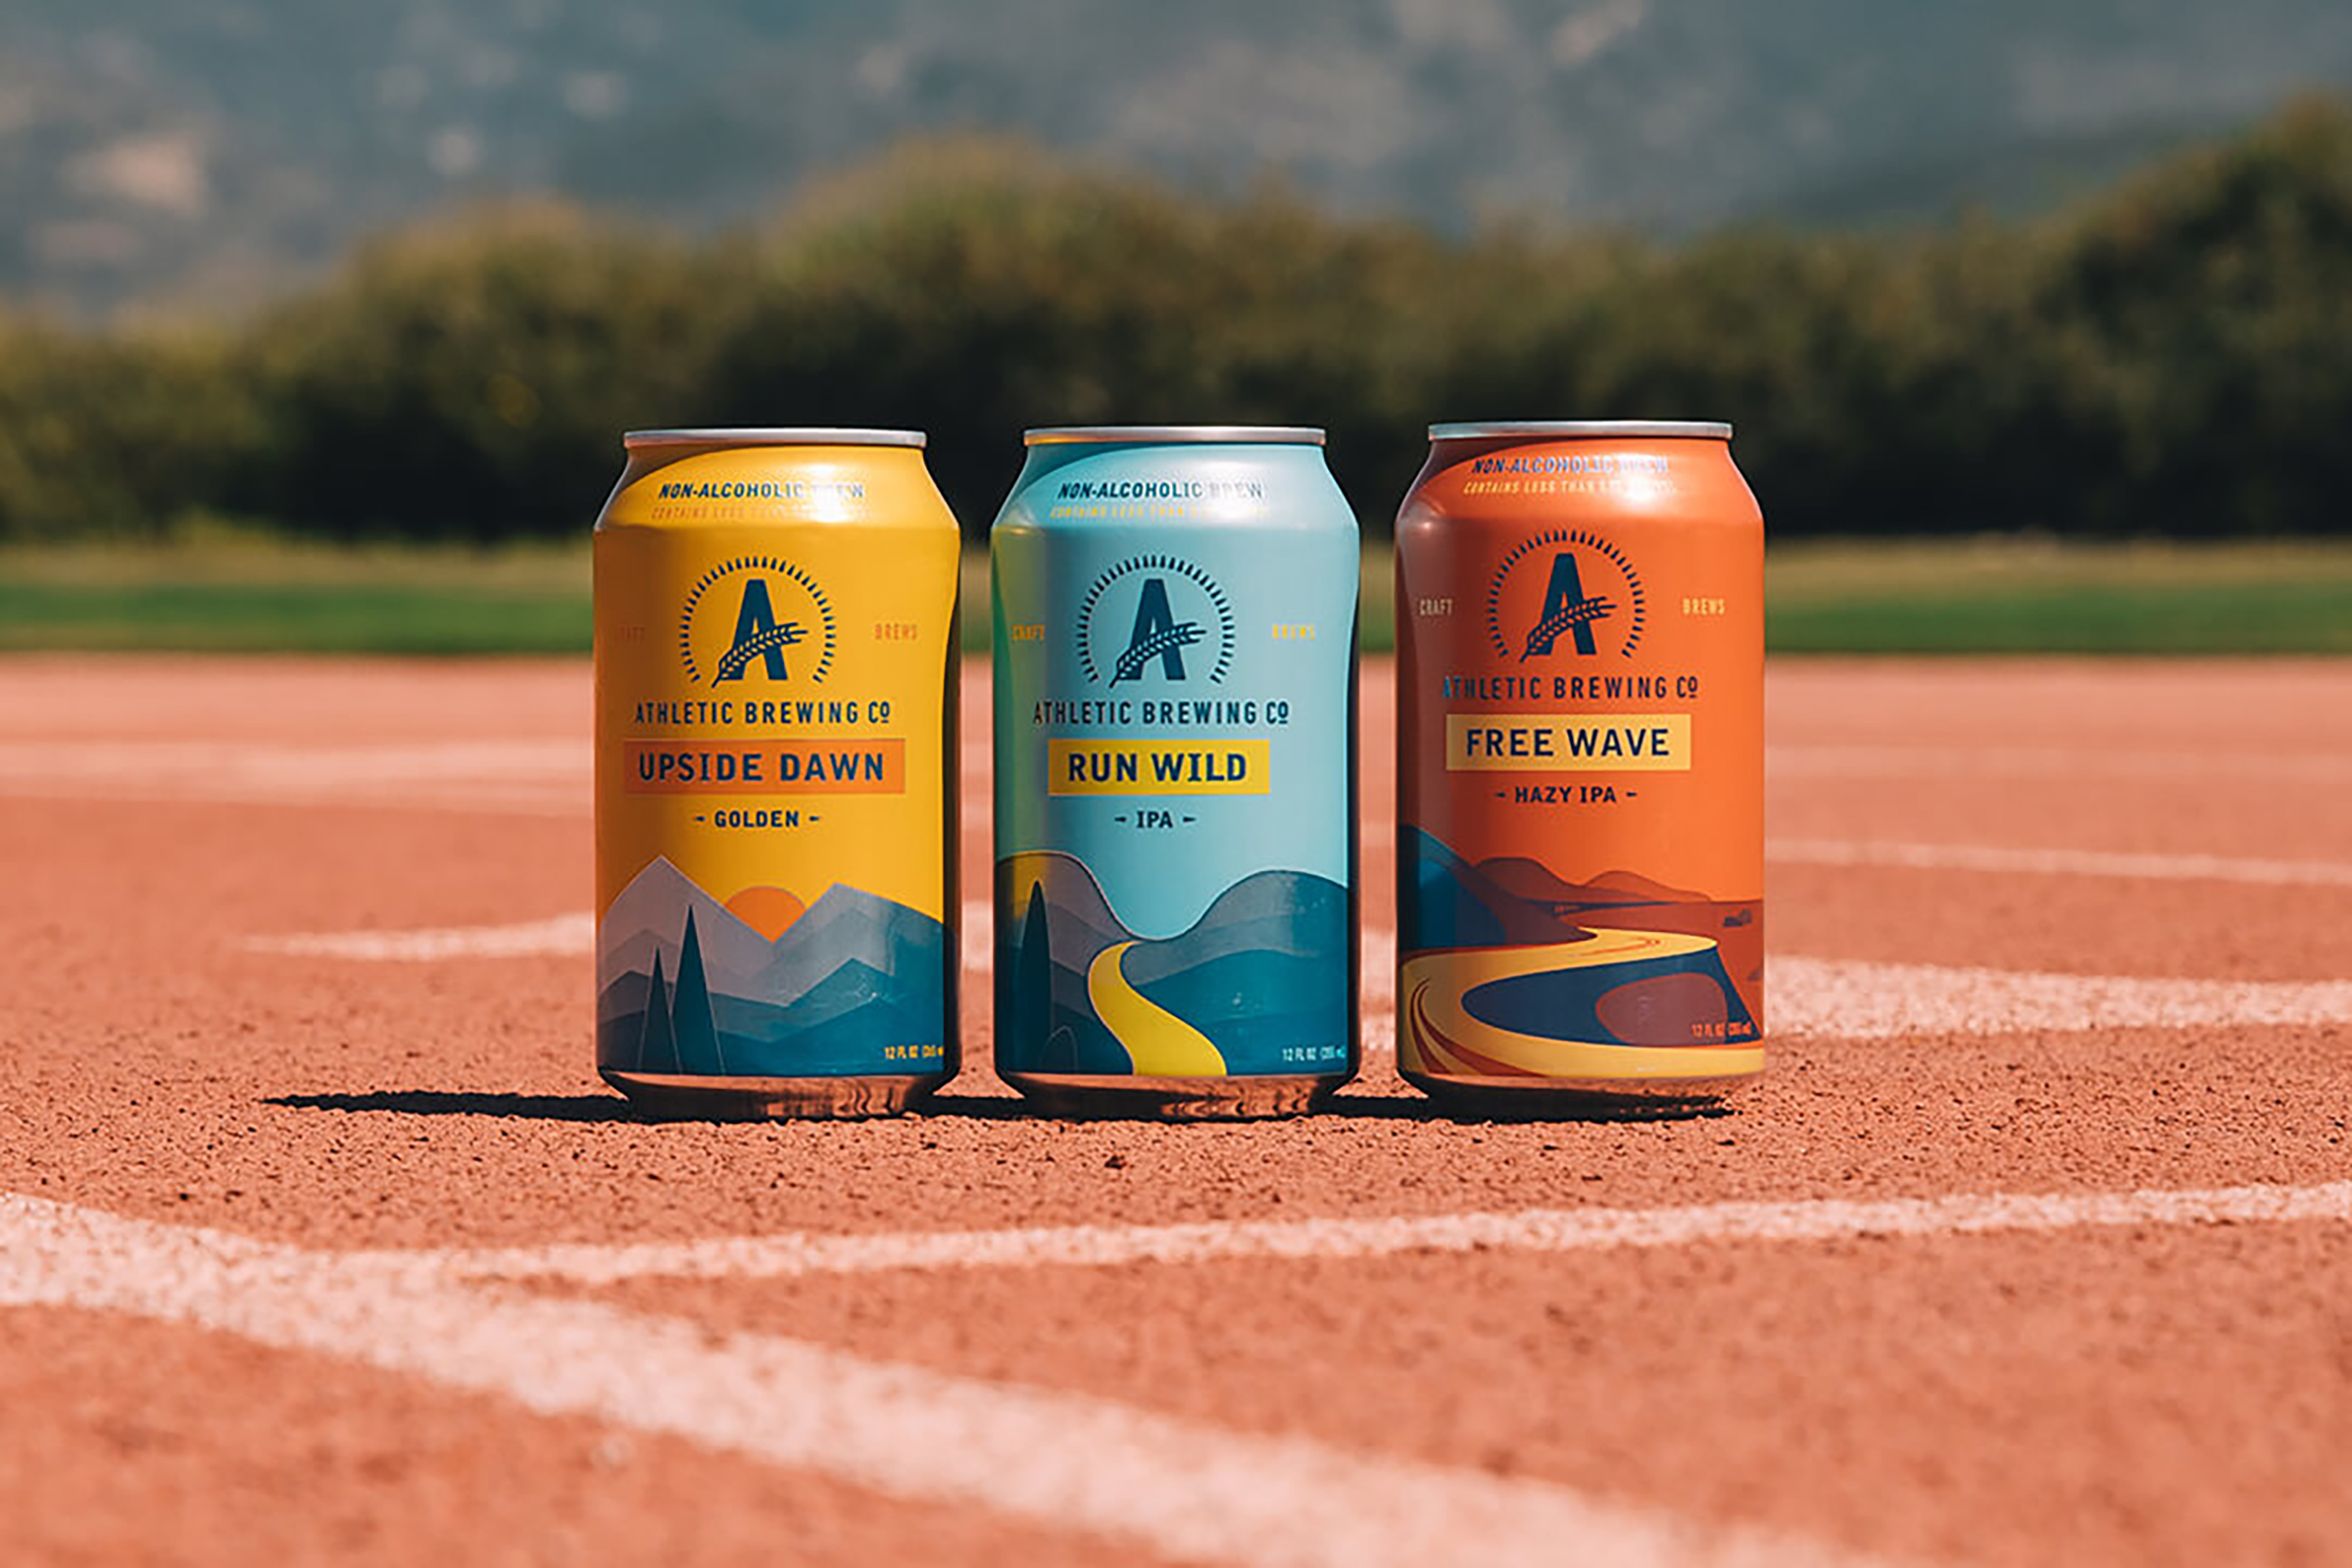 The foremost company in today's "no- or low-alcohol beer, except good" movement. (Athletic Brewing Company)